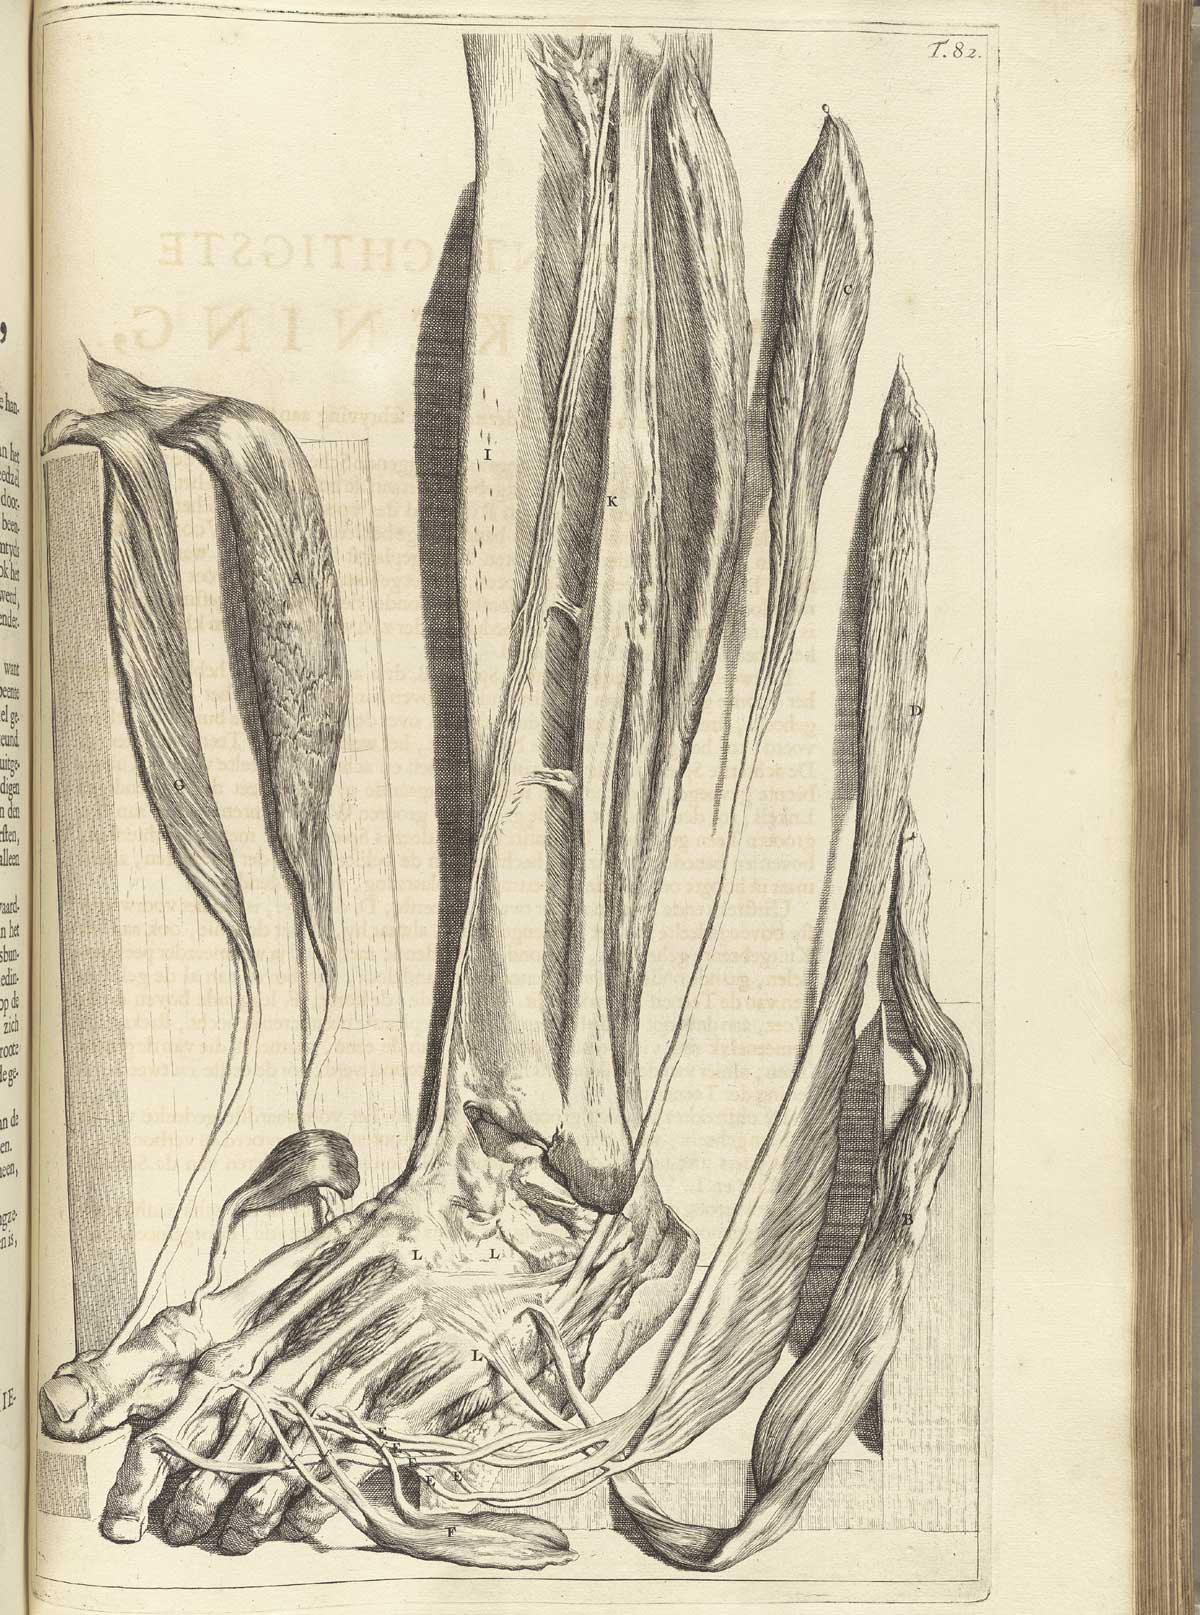 Engraving of a dissected foot and shin with muscles and sinews of the front of the shin and top of the foot separated by dissecting instruments for a detailed view; leg and foot are presented as if the subject is standing with a tools affixing the flesh to a wooden board underneath and to right and left; from Govard Bidloo’s Ontleding Des Menschelyken Lichaams, Amsterdam, 1690, NLM Call no. WZ 250 B5855anDu 1690.